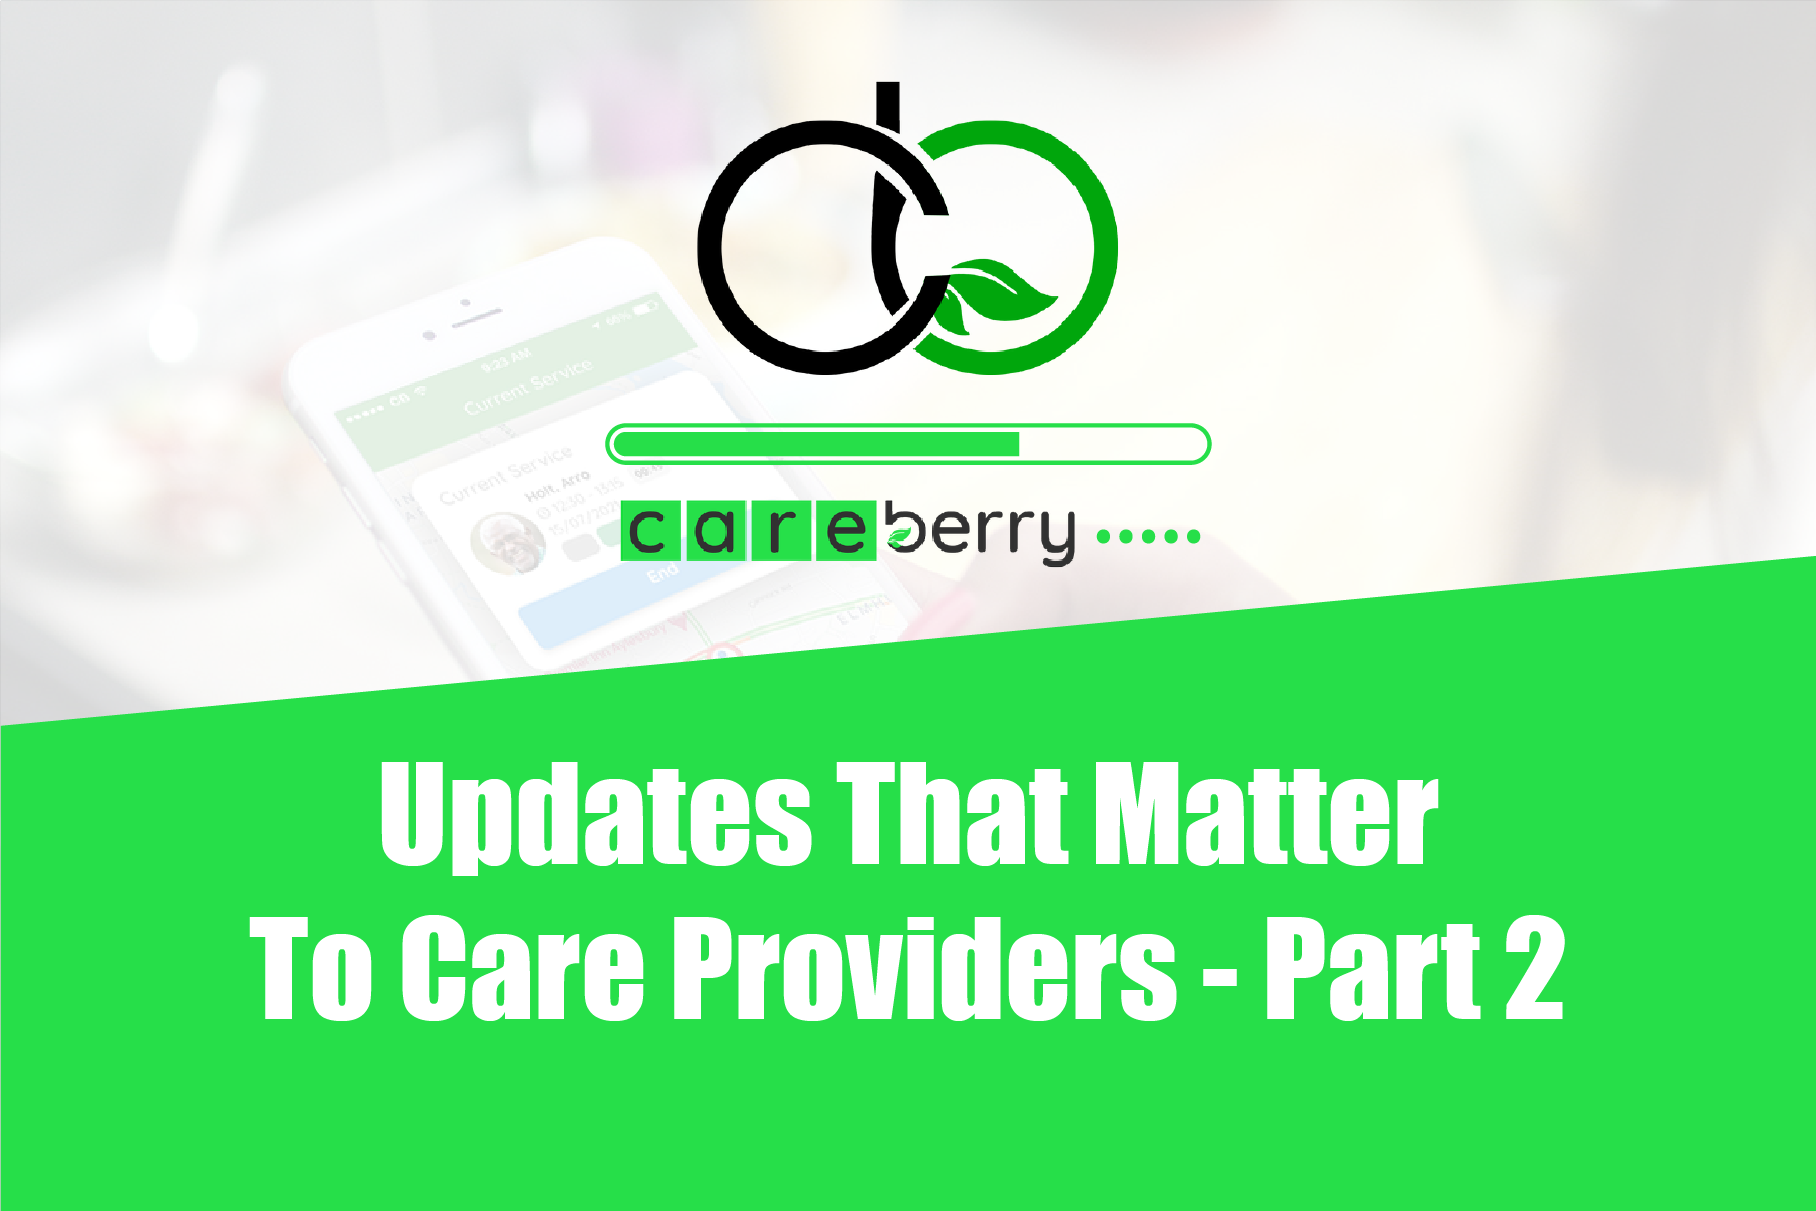 Updates That Matter to Care Providers - Part 2